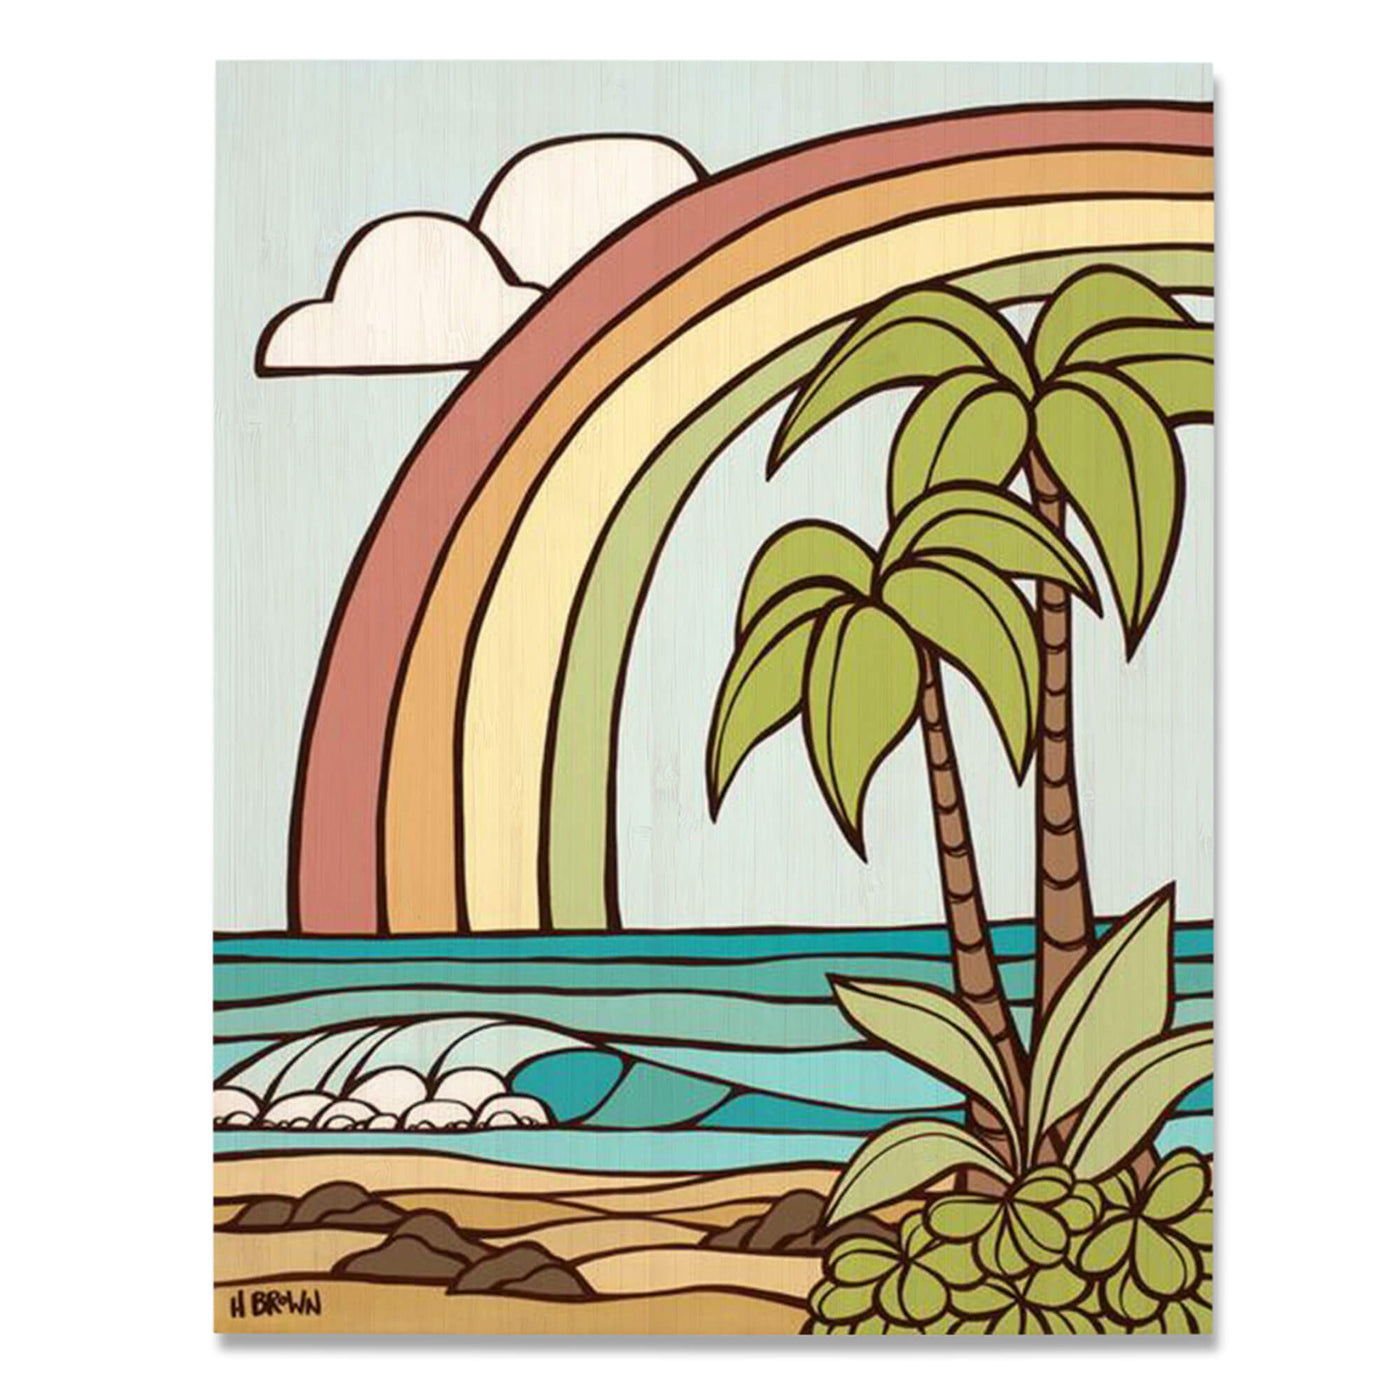 A bamboo art print featuring a beautiful pastel colored seascape with a rainbow, palm trees and a rolling wave by Hawaii surf artist Heather Brown